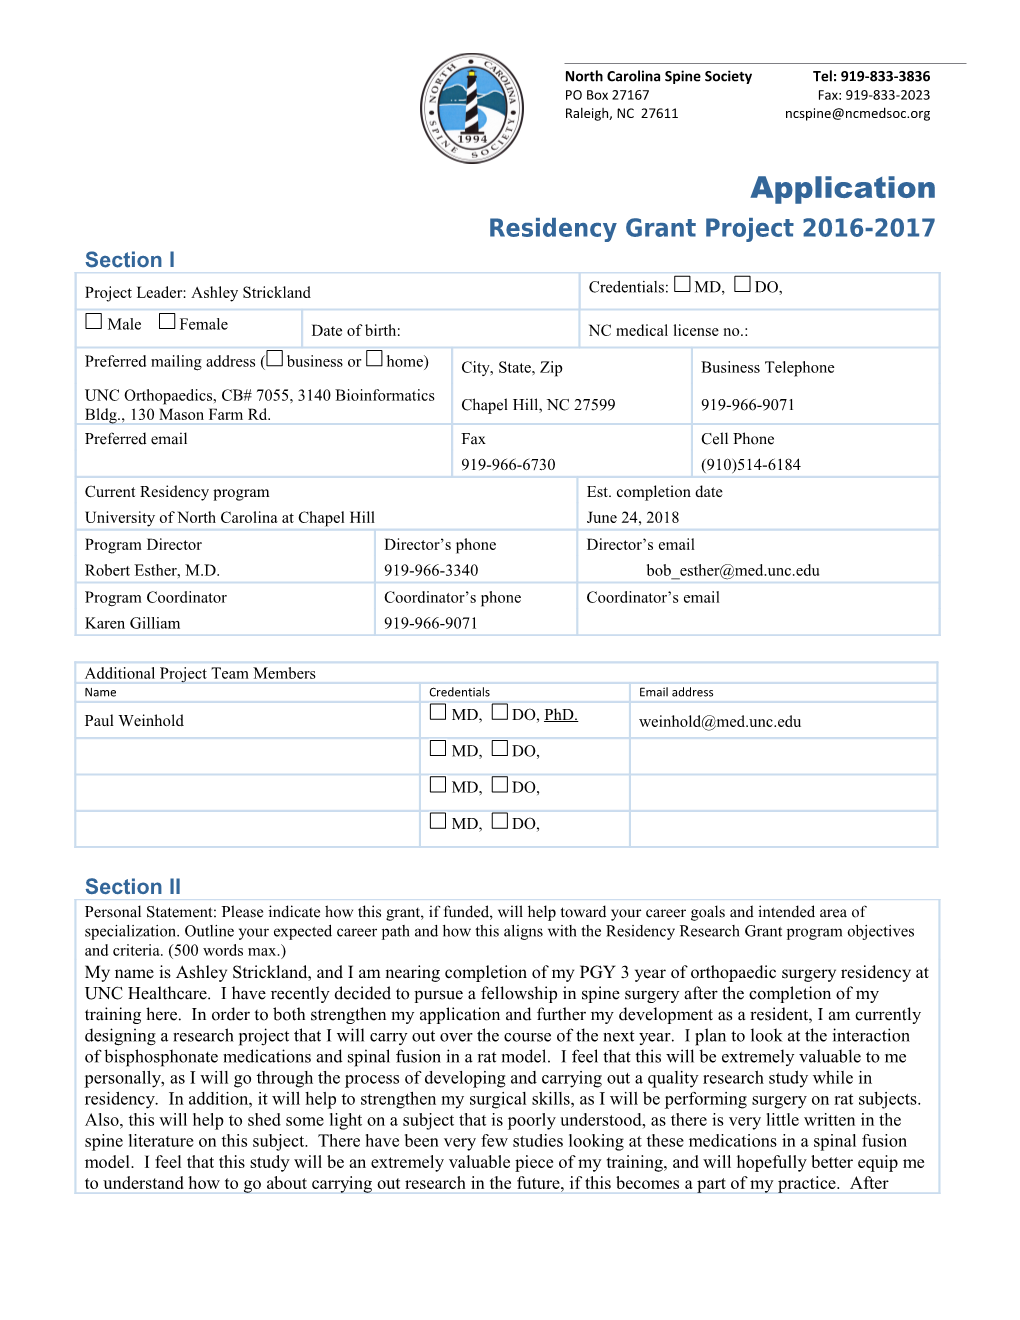 Application - Residency Grant Project 2016-2017